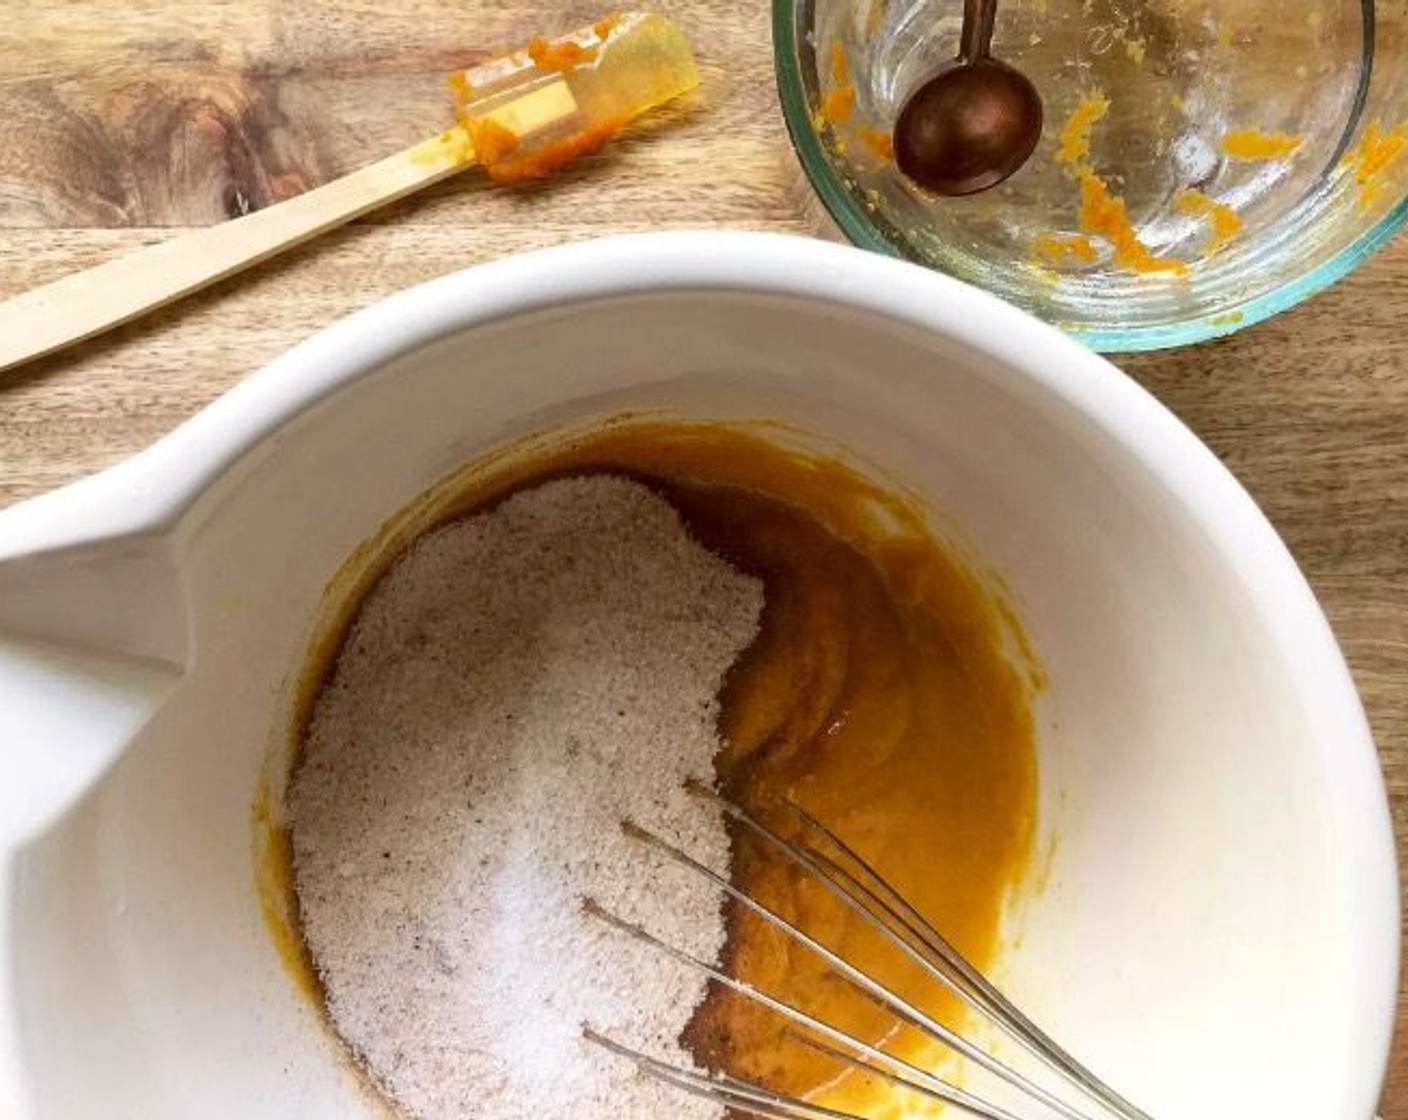 step 3 Combine the yolks of Farmhouse Eggs® Large Brown Eggs (6), Granulated Sugar (1/2 cup), Canned Pumpkin Purée (1/2 cup), Pure Vanilla Extract (1 tsp), Ground Cinnamon (1/2 tsp), Ground Ginger (1/4 tsp), Ground Nutmeg (1/4 tsp), Ground Cloves (1/4 tsp), {@10:}, Freshly Ground Black Pepper (1/4 tsp), and Kosher Salt (1/4 tsp) in a large mixing bowl, whisking together just until smooth.